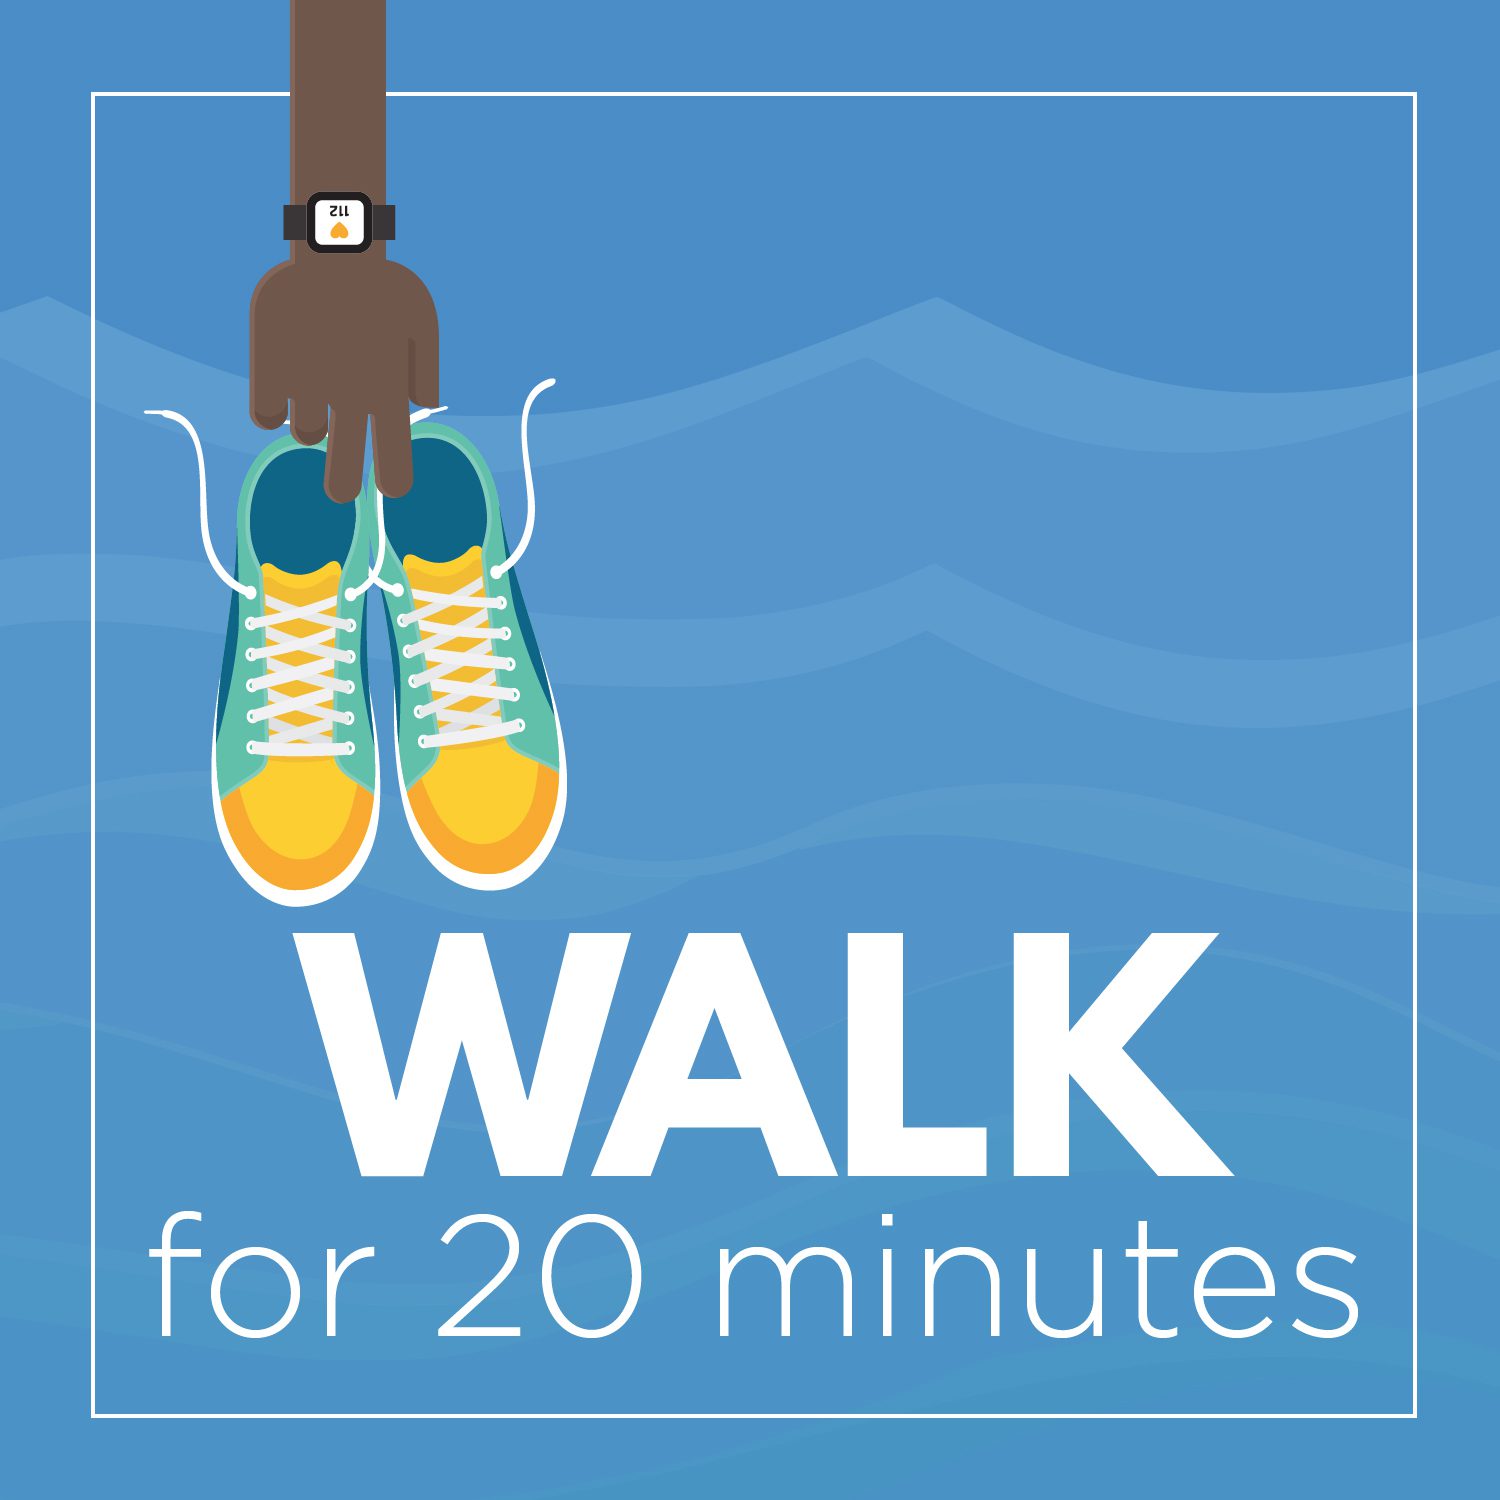 Walk for 20 minutes